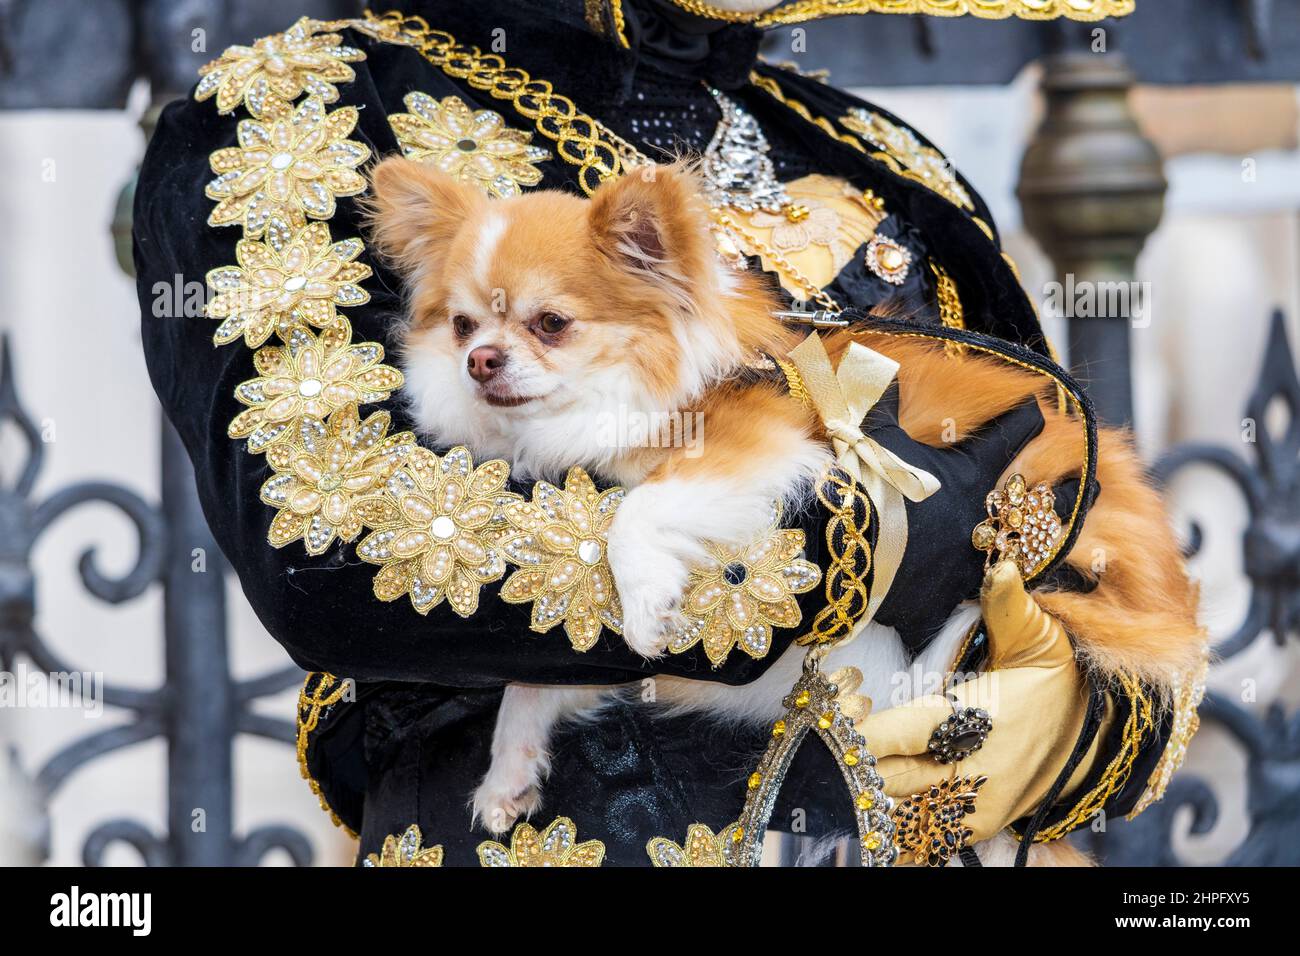 Venice, Italy. 21 February 2022. Dog in costume. Colourful costumes at the Carnival in Venice. Photo: Vibrant Pictures/Alamy Live News Stock Photo